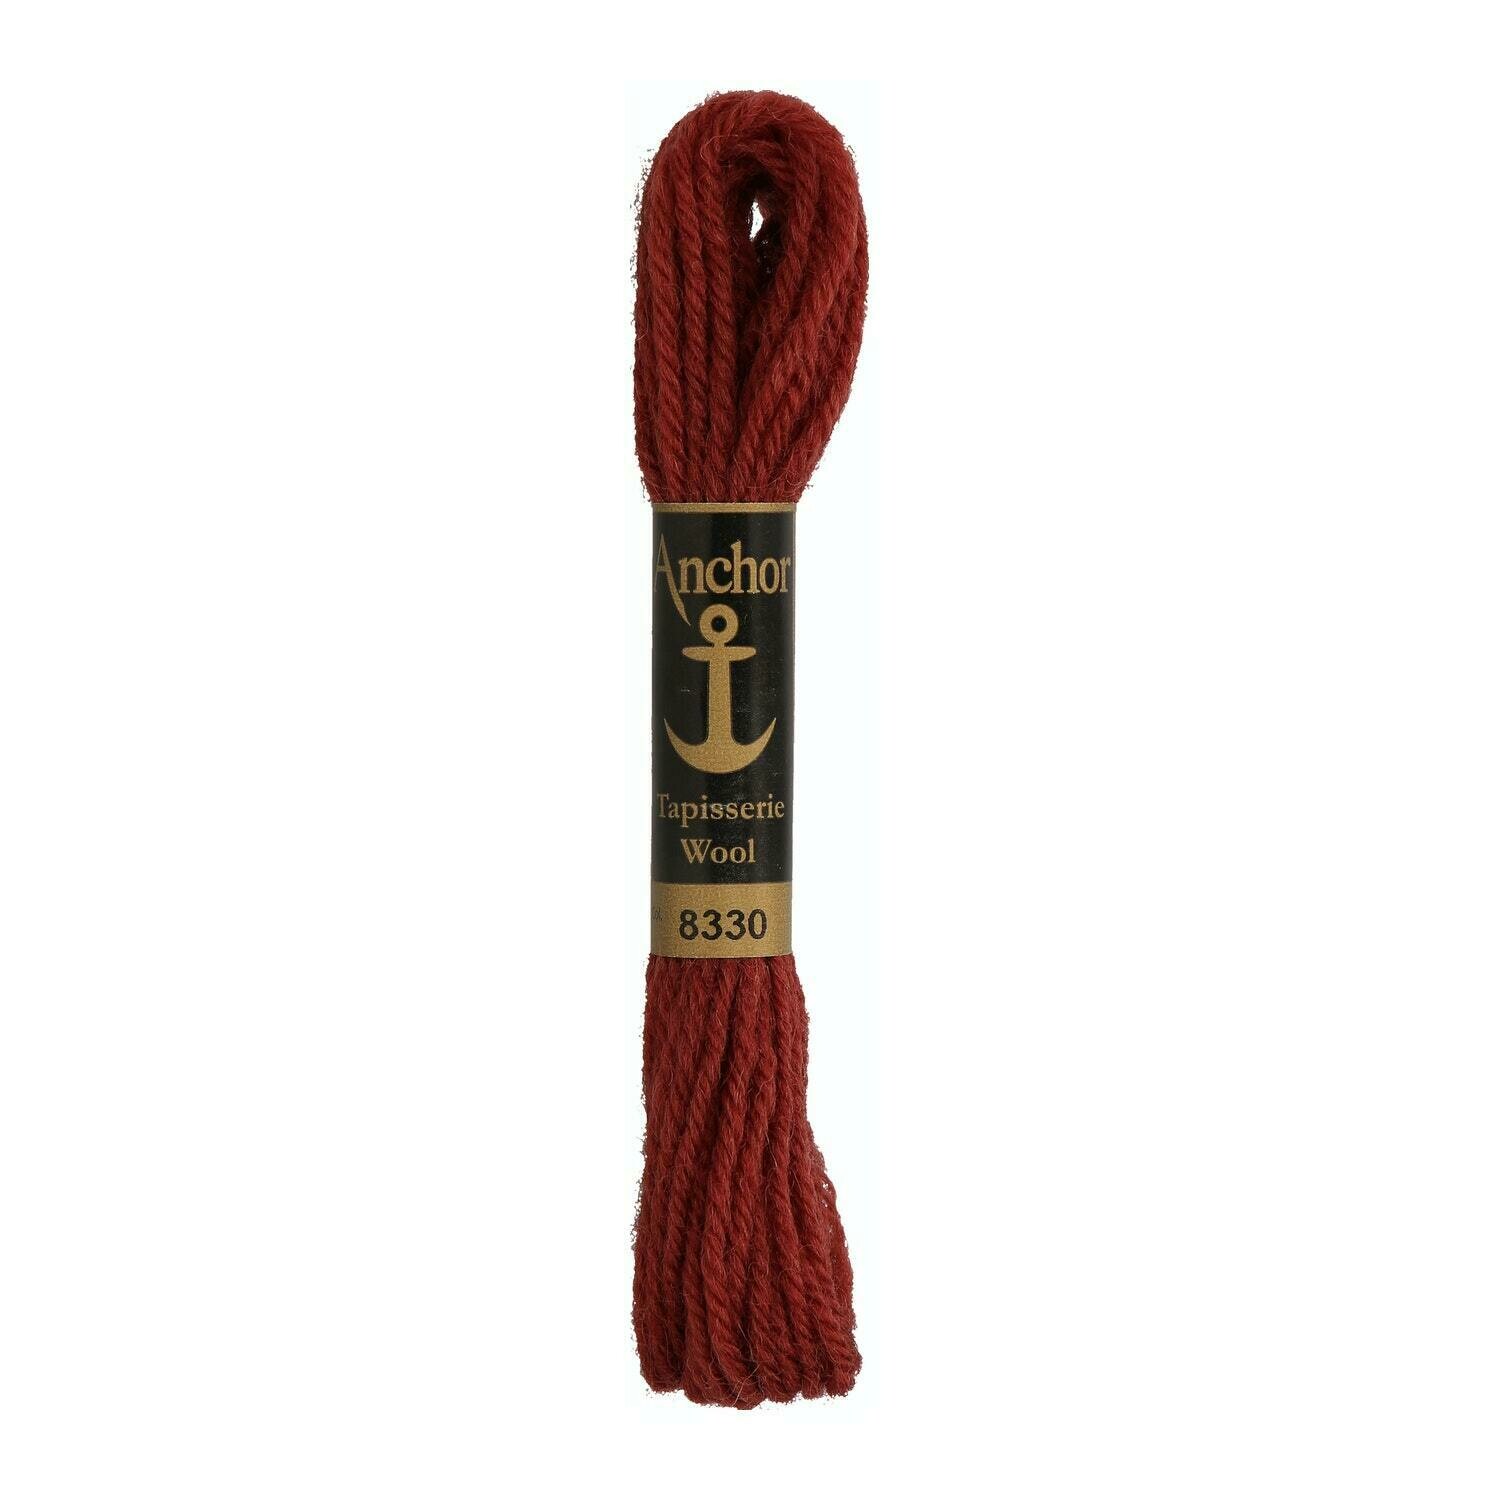 Anchor Tapisserie Wool #08330